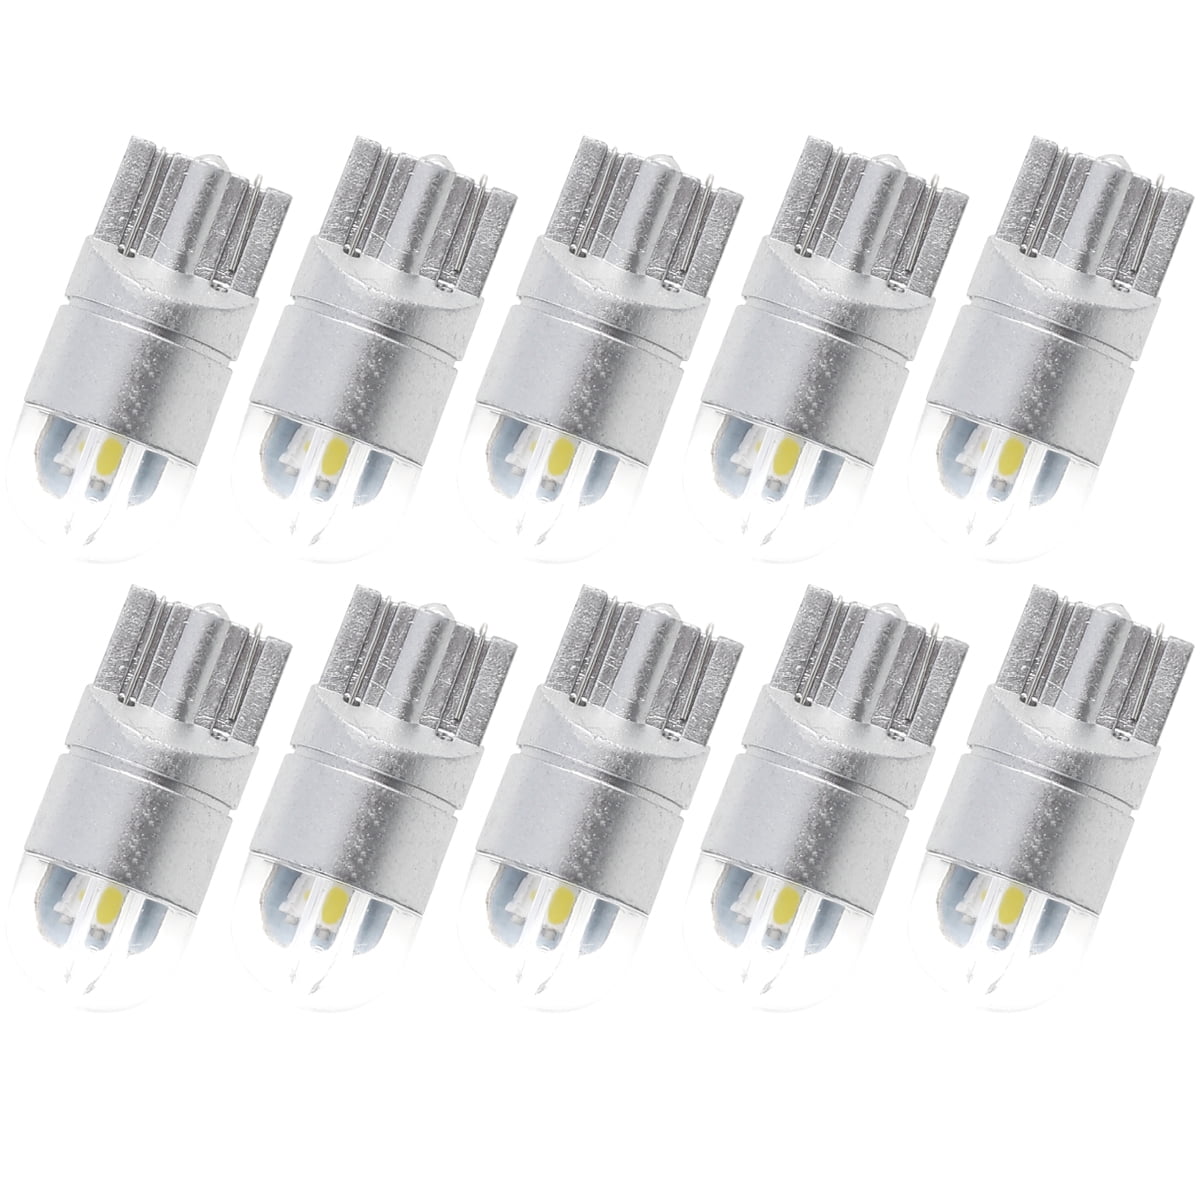 194 168 2825 W5W New Practical 10x T10 20-SMD LED Bright White Car Lights Bulb 